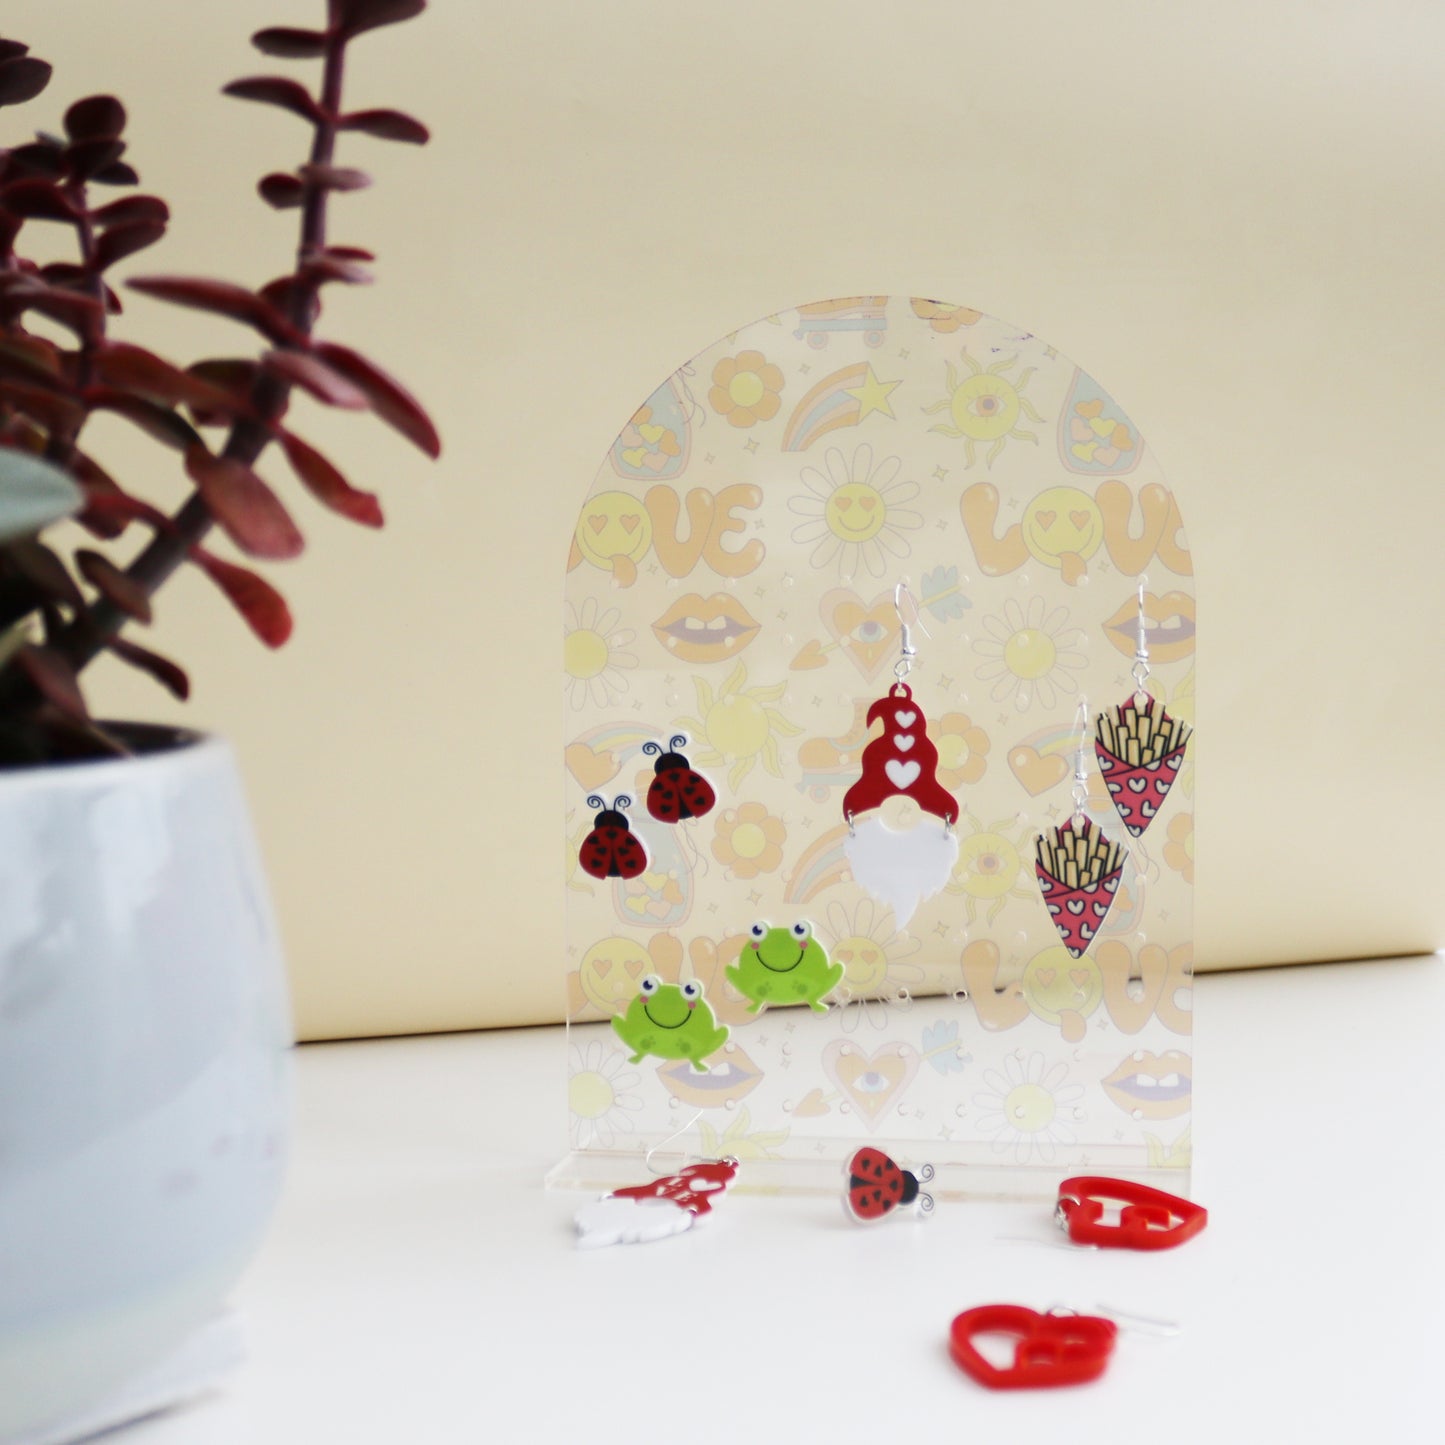 pretty acrylic earring holder printed with a meadow scene and can be personalised image shows personalisation as Mum&#39;s earrings